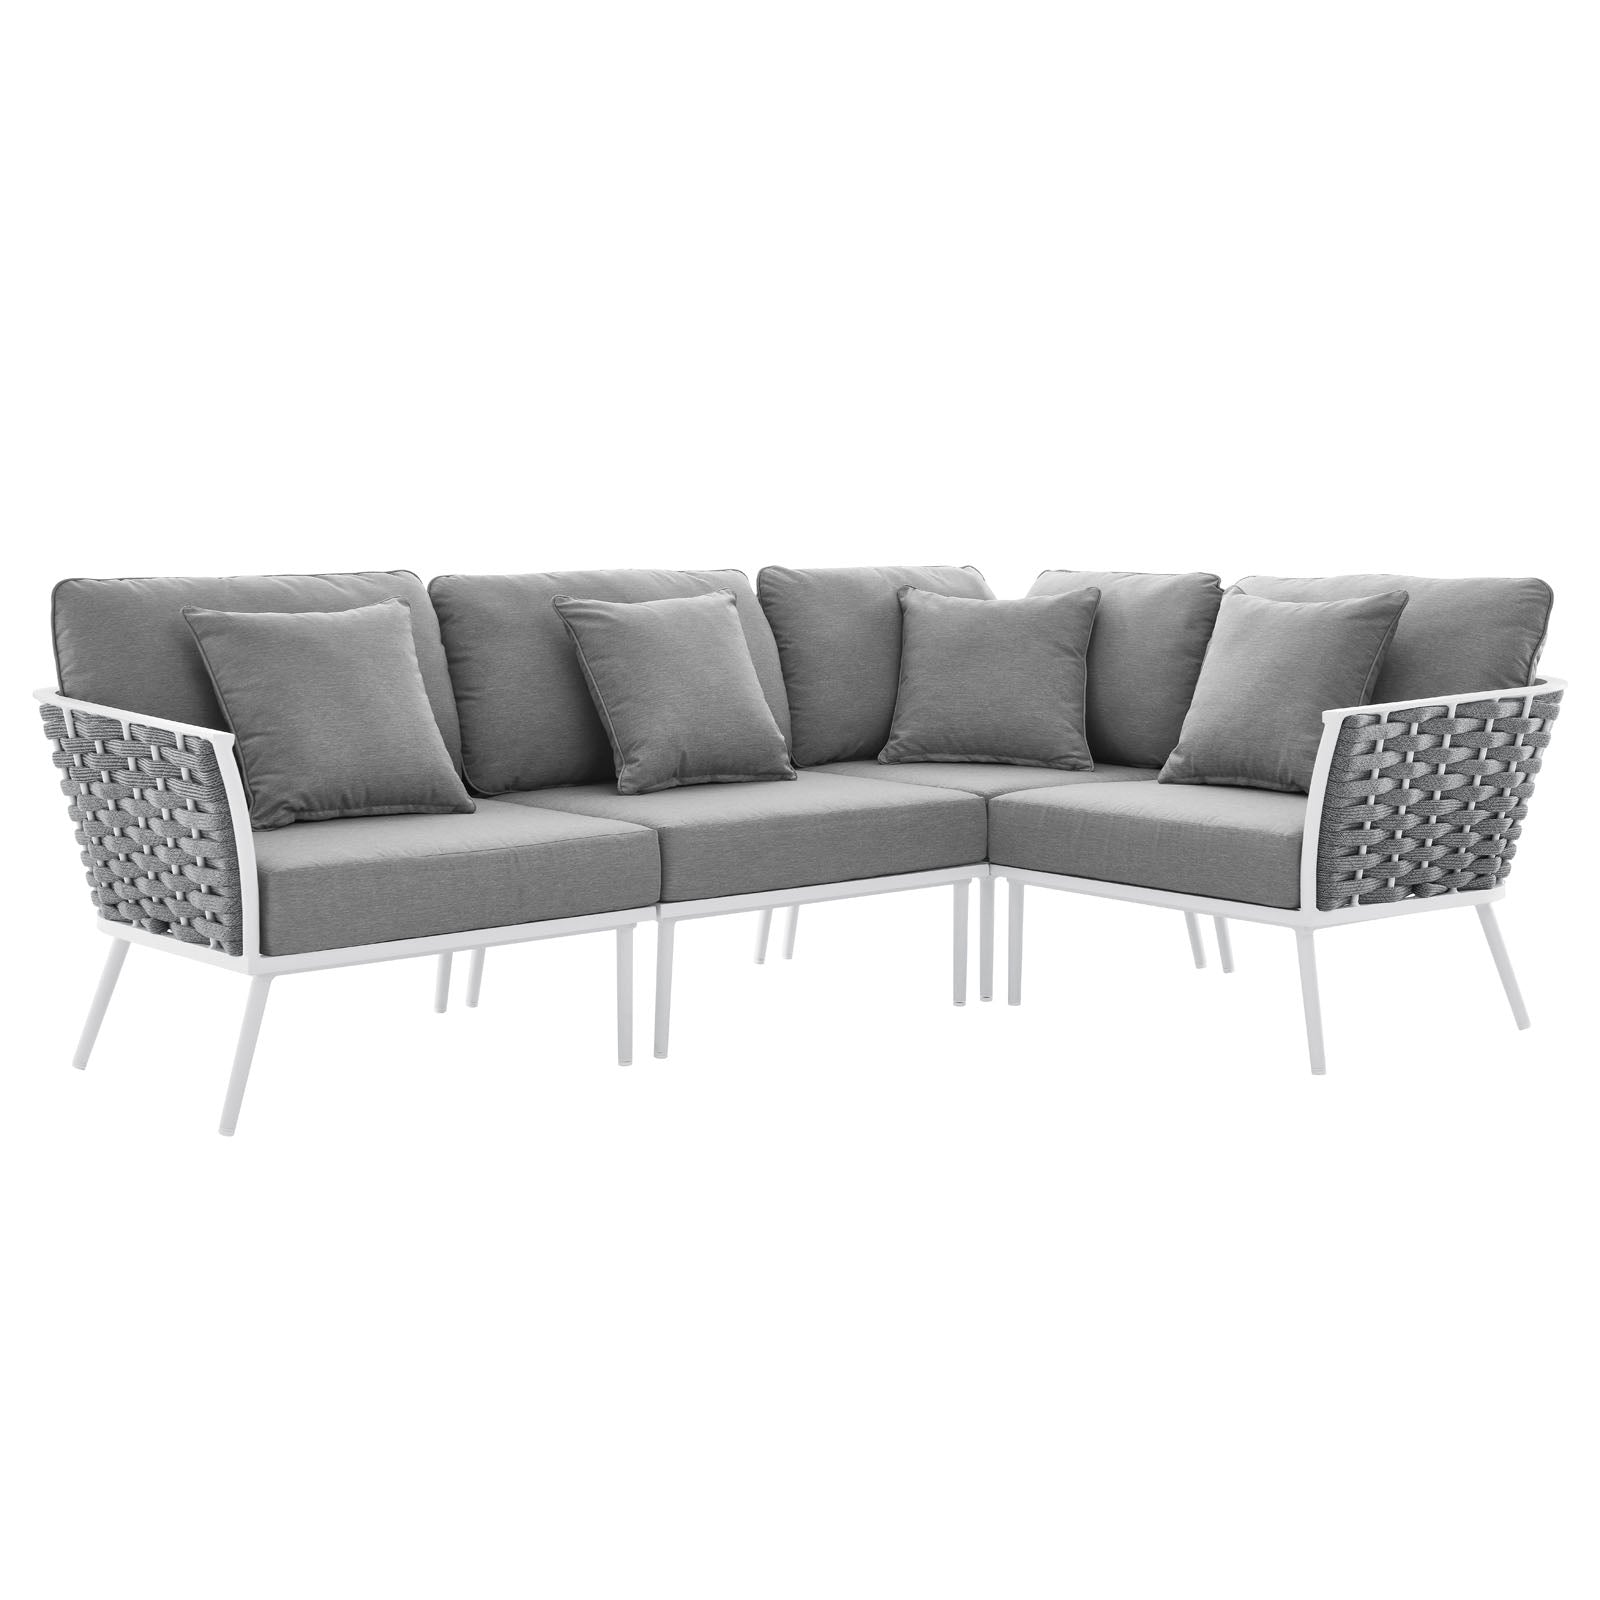 Stance Outdoor Patio Aluminum Large Sectional Sofa - East Shore Modern Home Furnishings